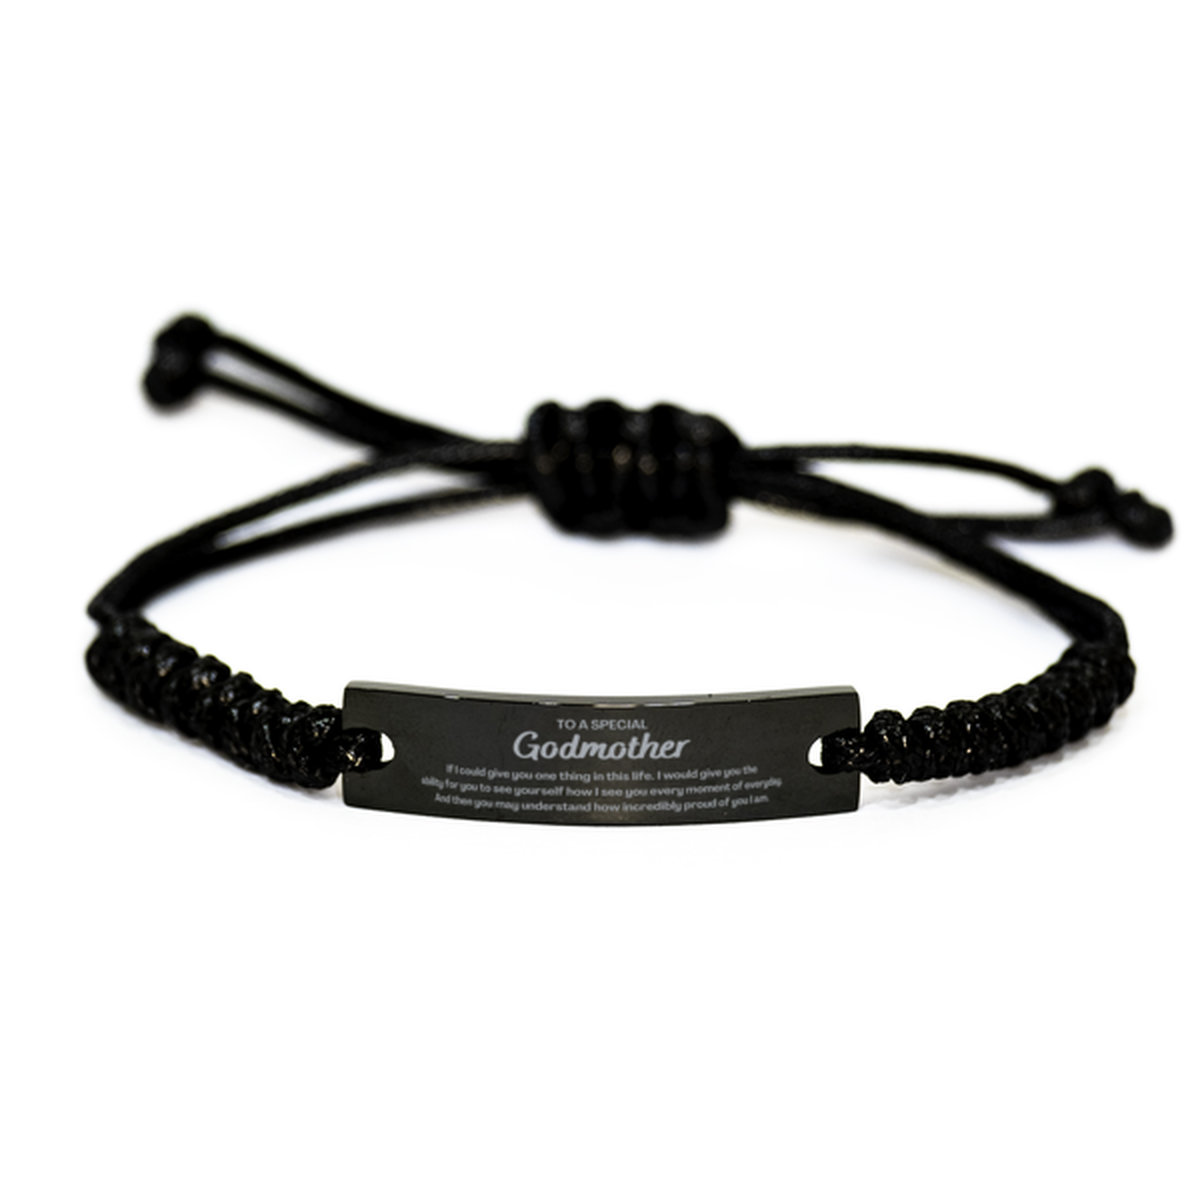 To My Godmother Black Rope Bracelet, Gifts For Godmother Engraved, Inspirational Gifts for Christmas Birthday, Epic Gifts for Godmother To A Special Godmother how incredibly proud of you I am